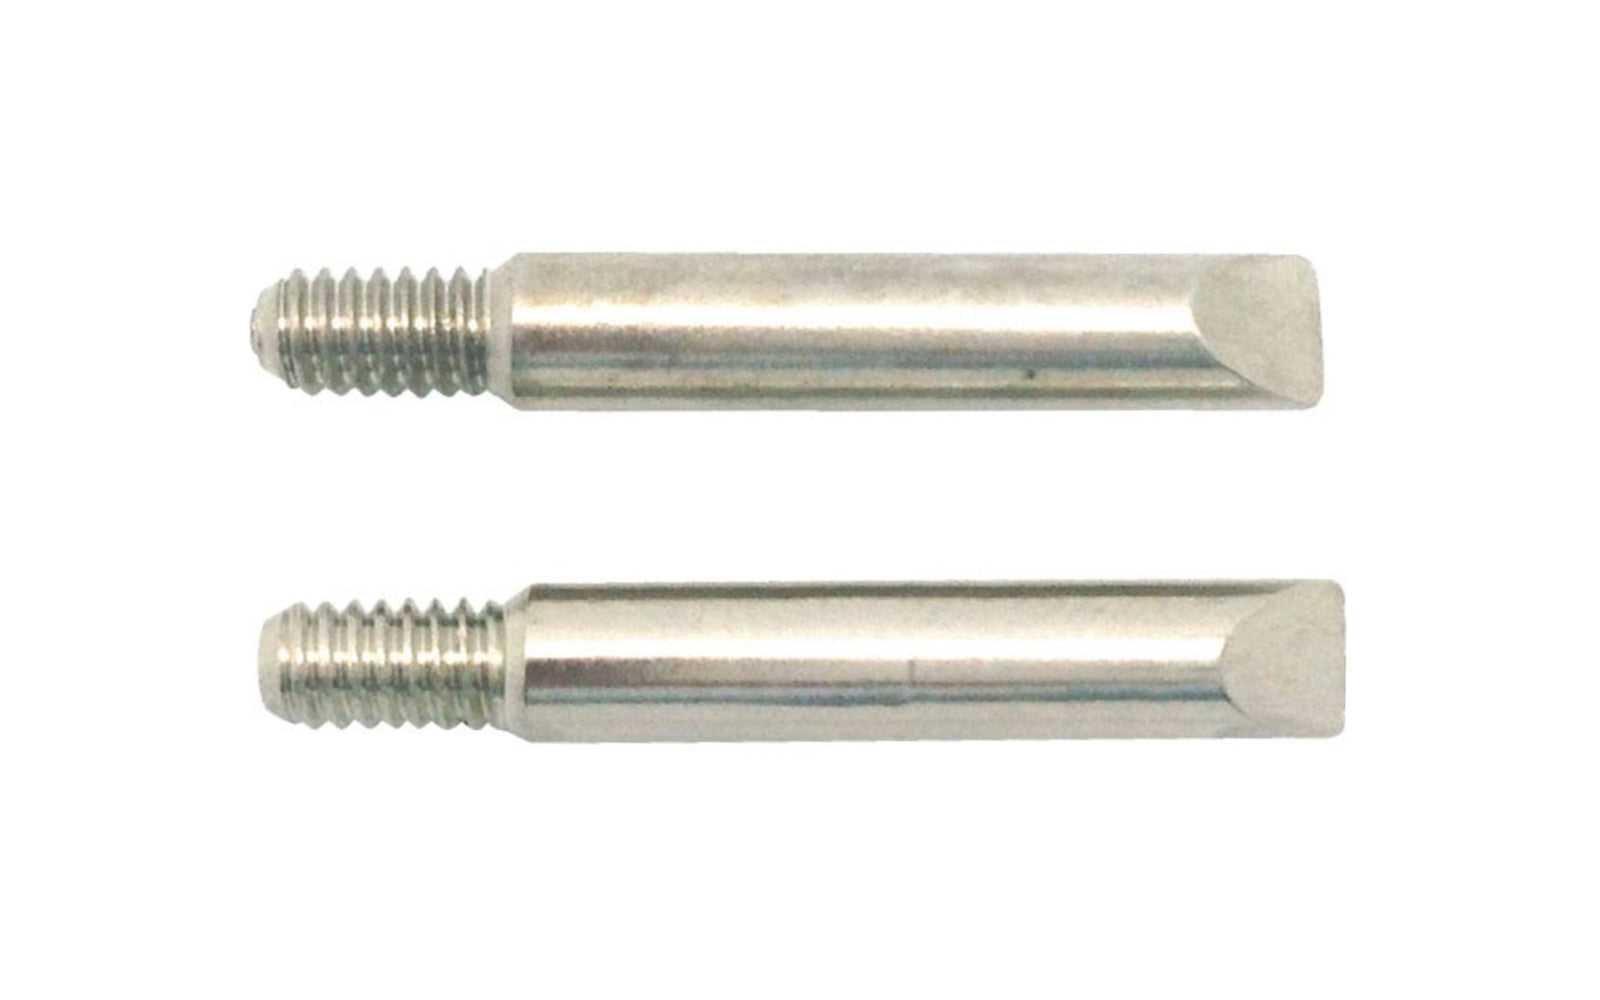 Wall Lenk Soldering Tips ~ L25CT. Fits Wall Lenk models L25, L25K, L30, L30K, SSG1000K. Sold as two tips in pack.    Made in USA.  